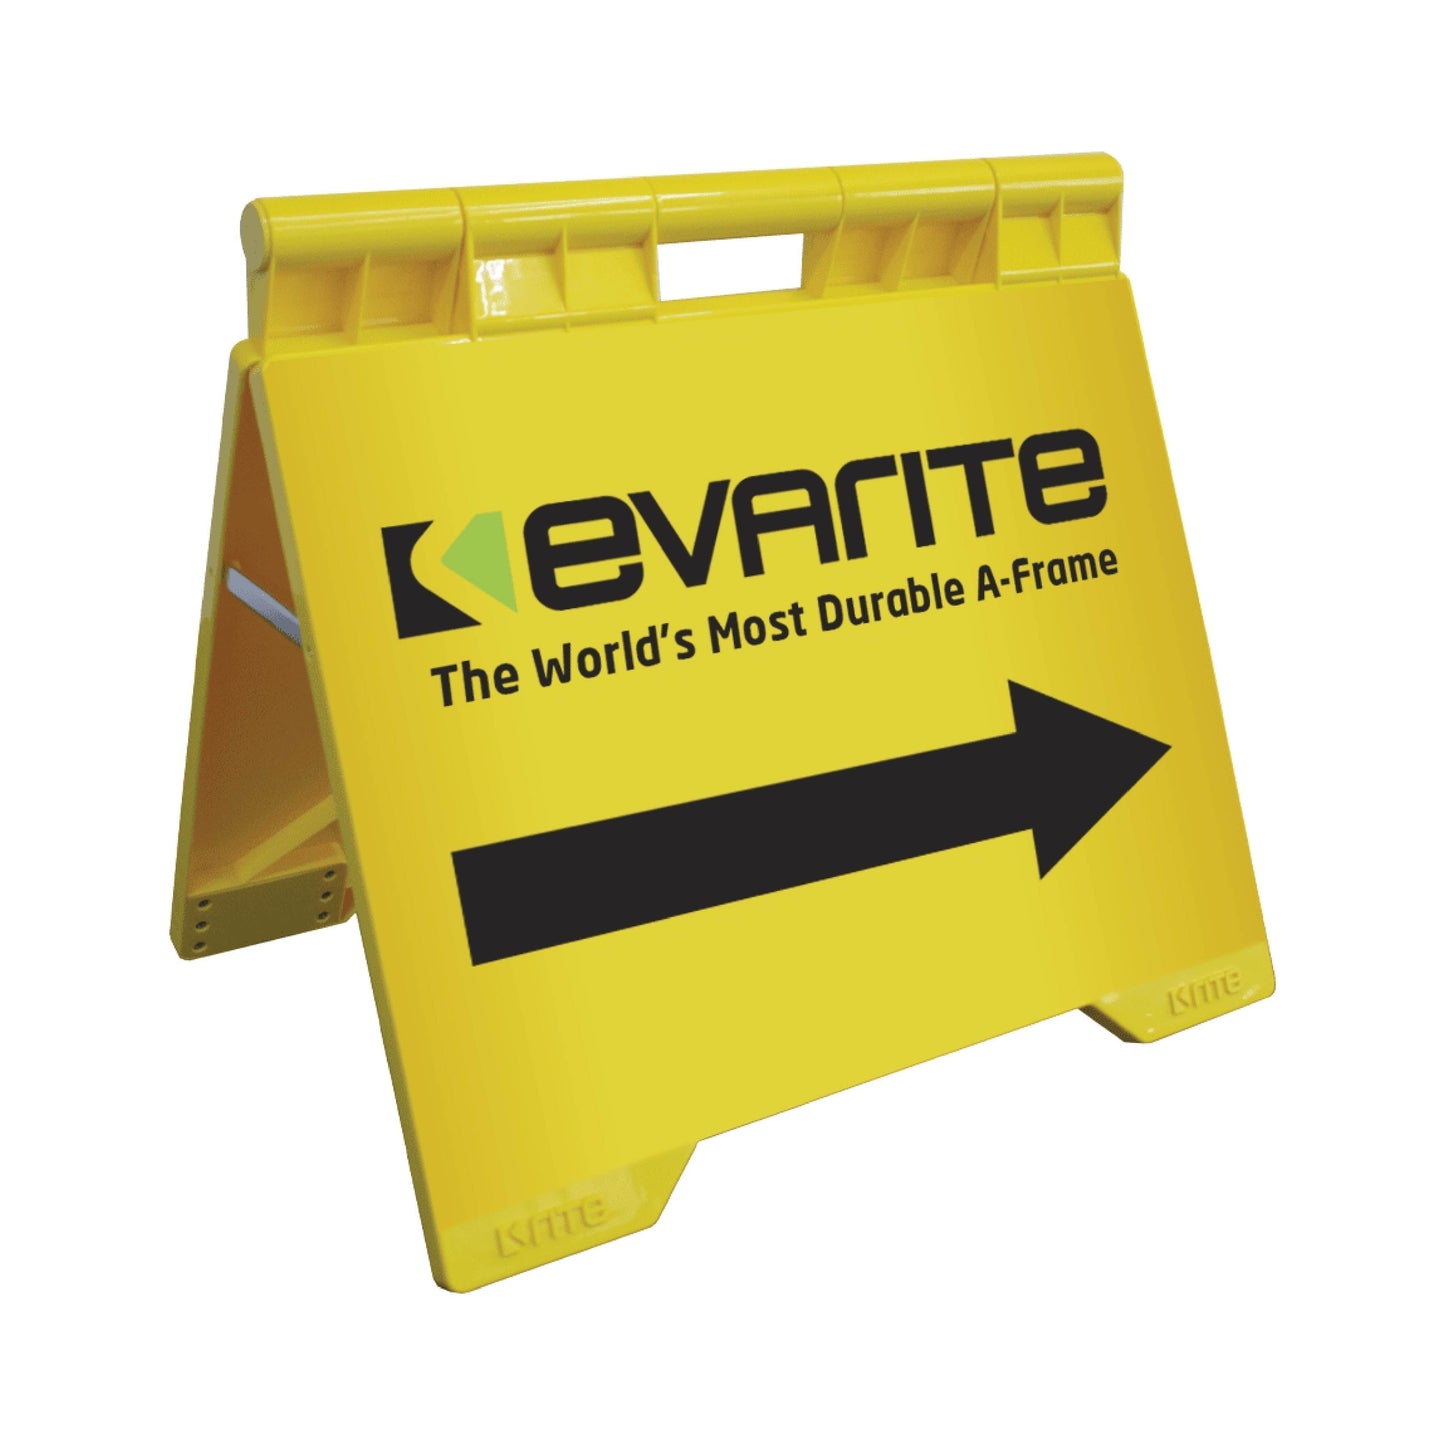 Restricted Area Aisle Temporary Closed - Evarite A-Frame Sign